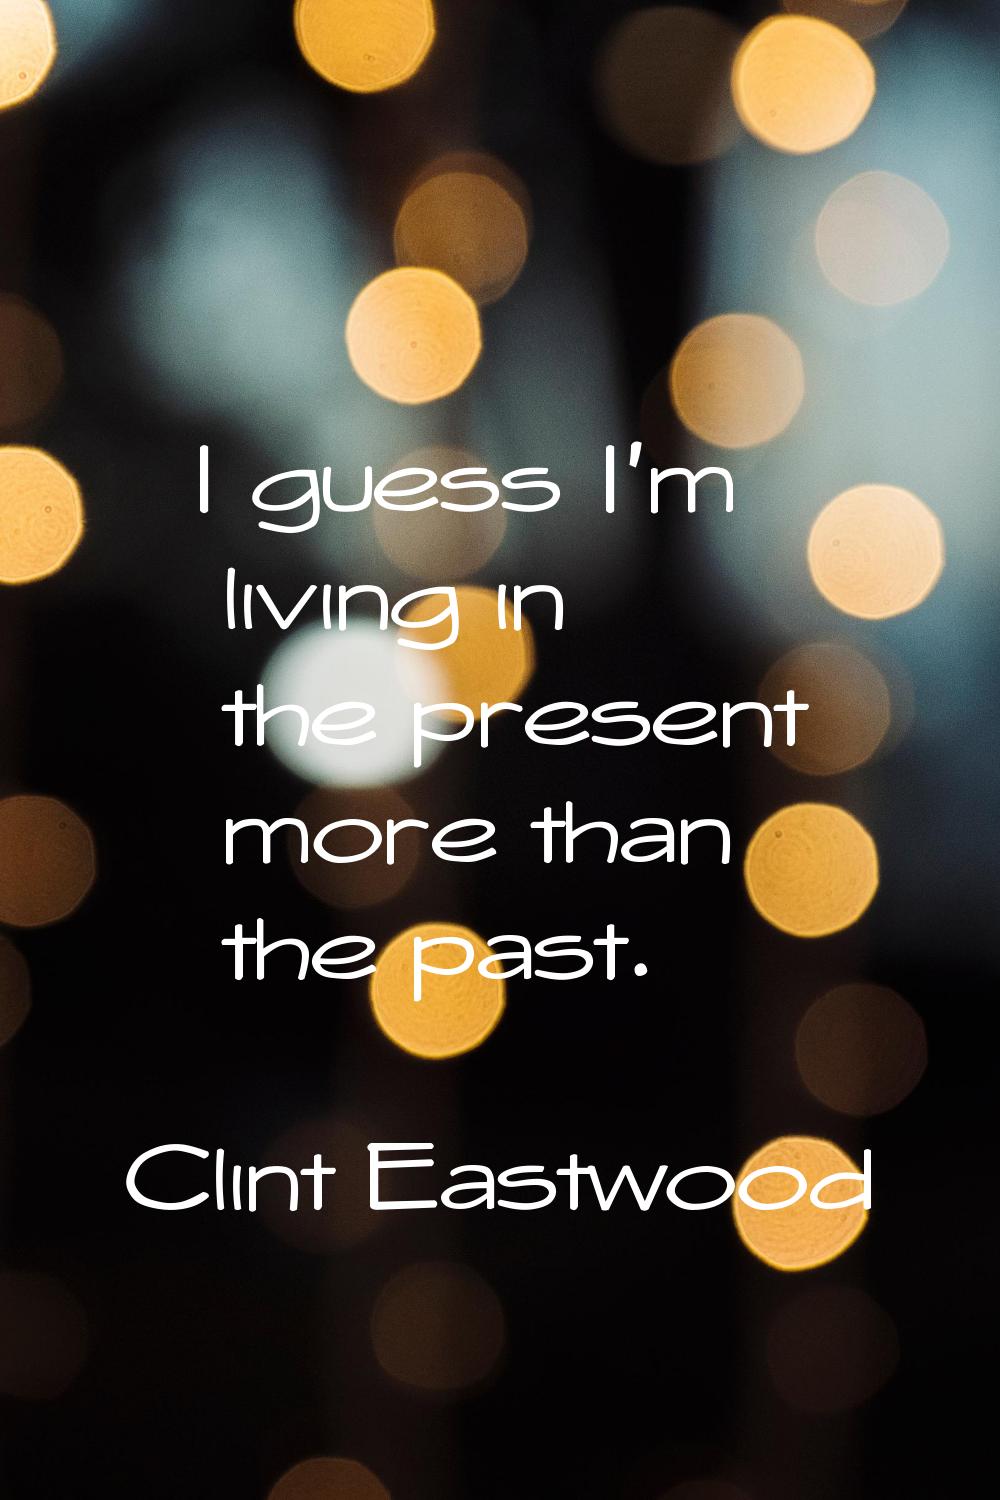 I guess I'm living in the present more than the past.